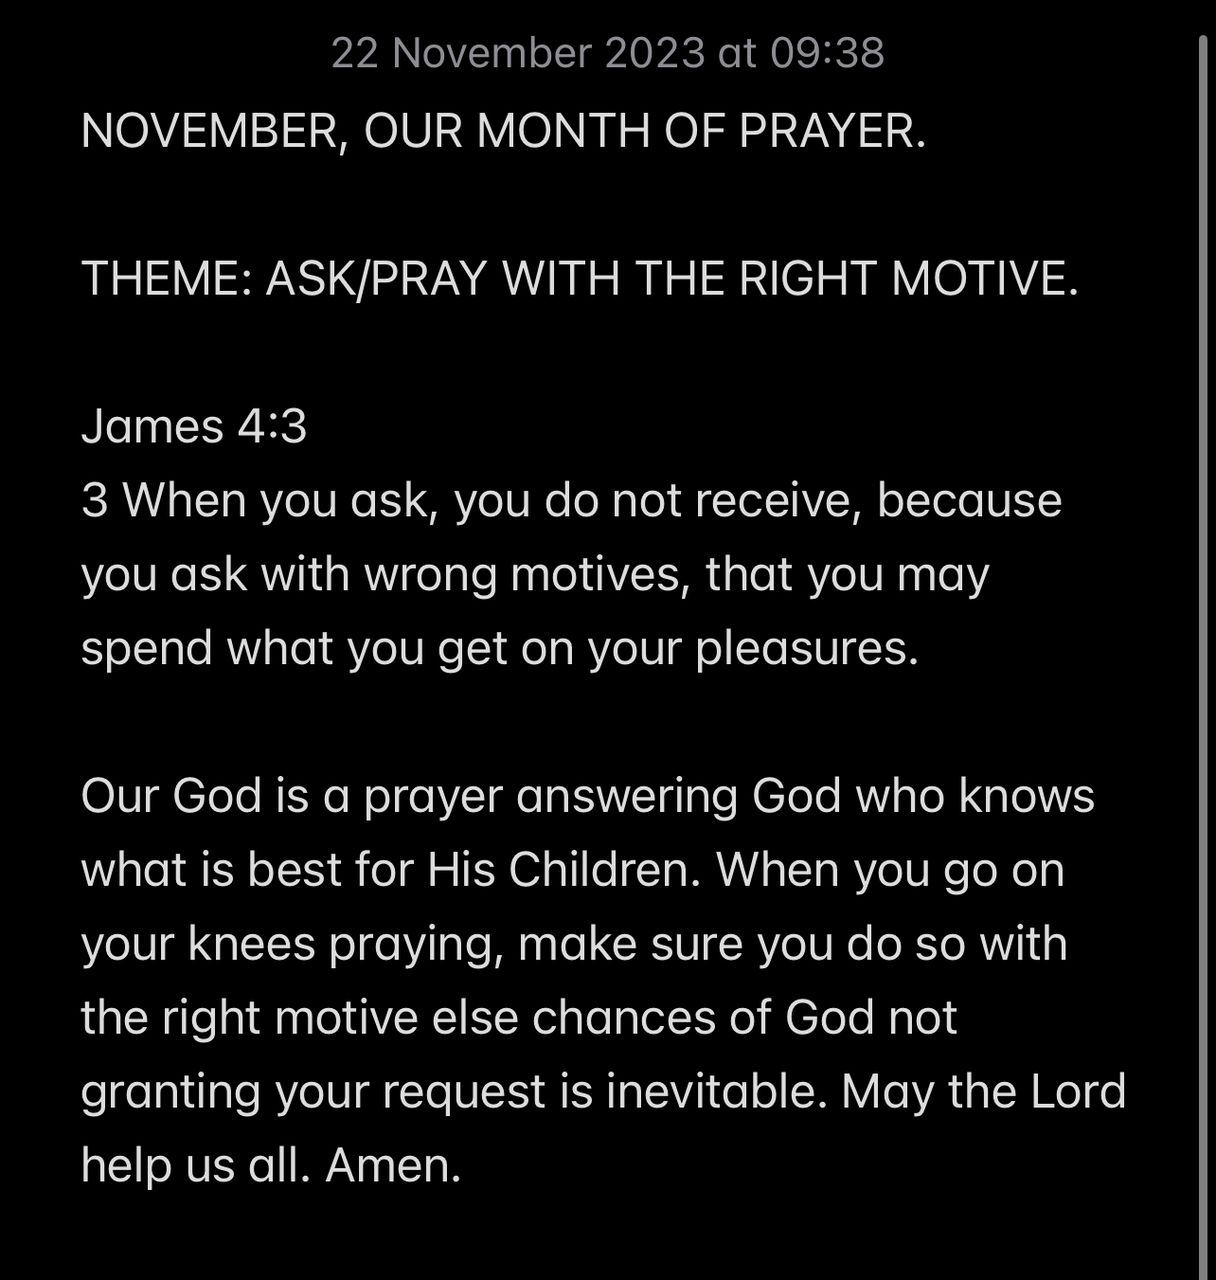 ASK/PRAY WITH THE RIGHT MOTIVE.